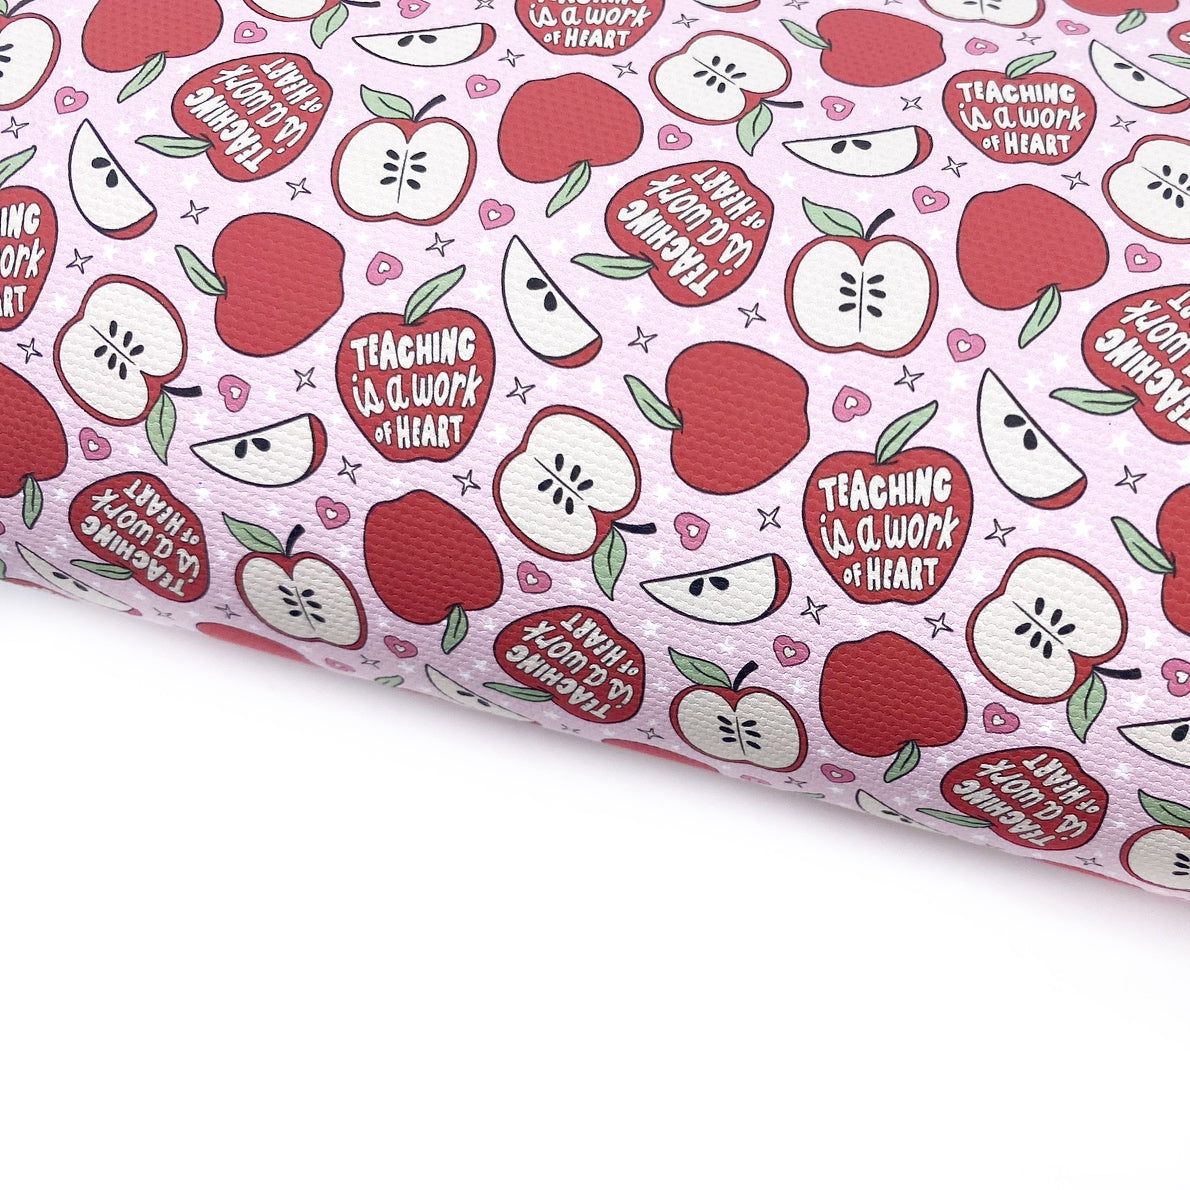 Teaching is a work of Heart Apples Lux Premium Printed Bow Fabric